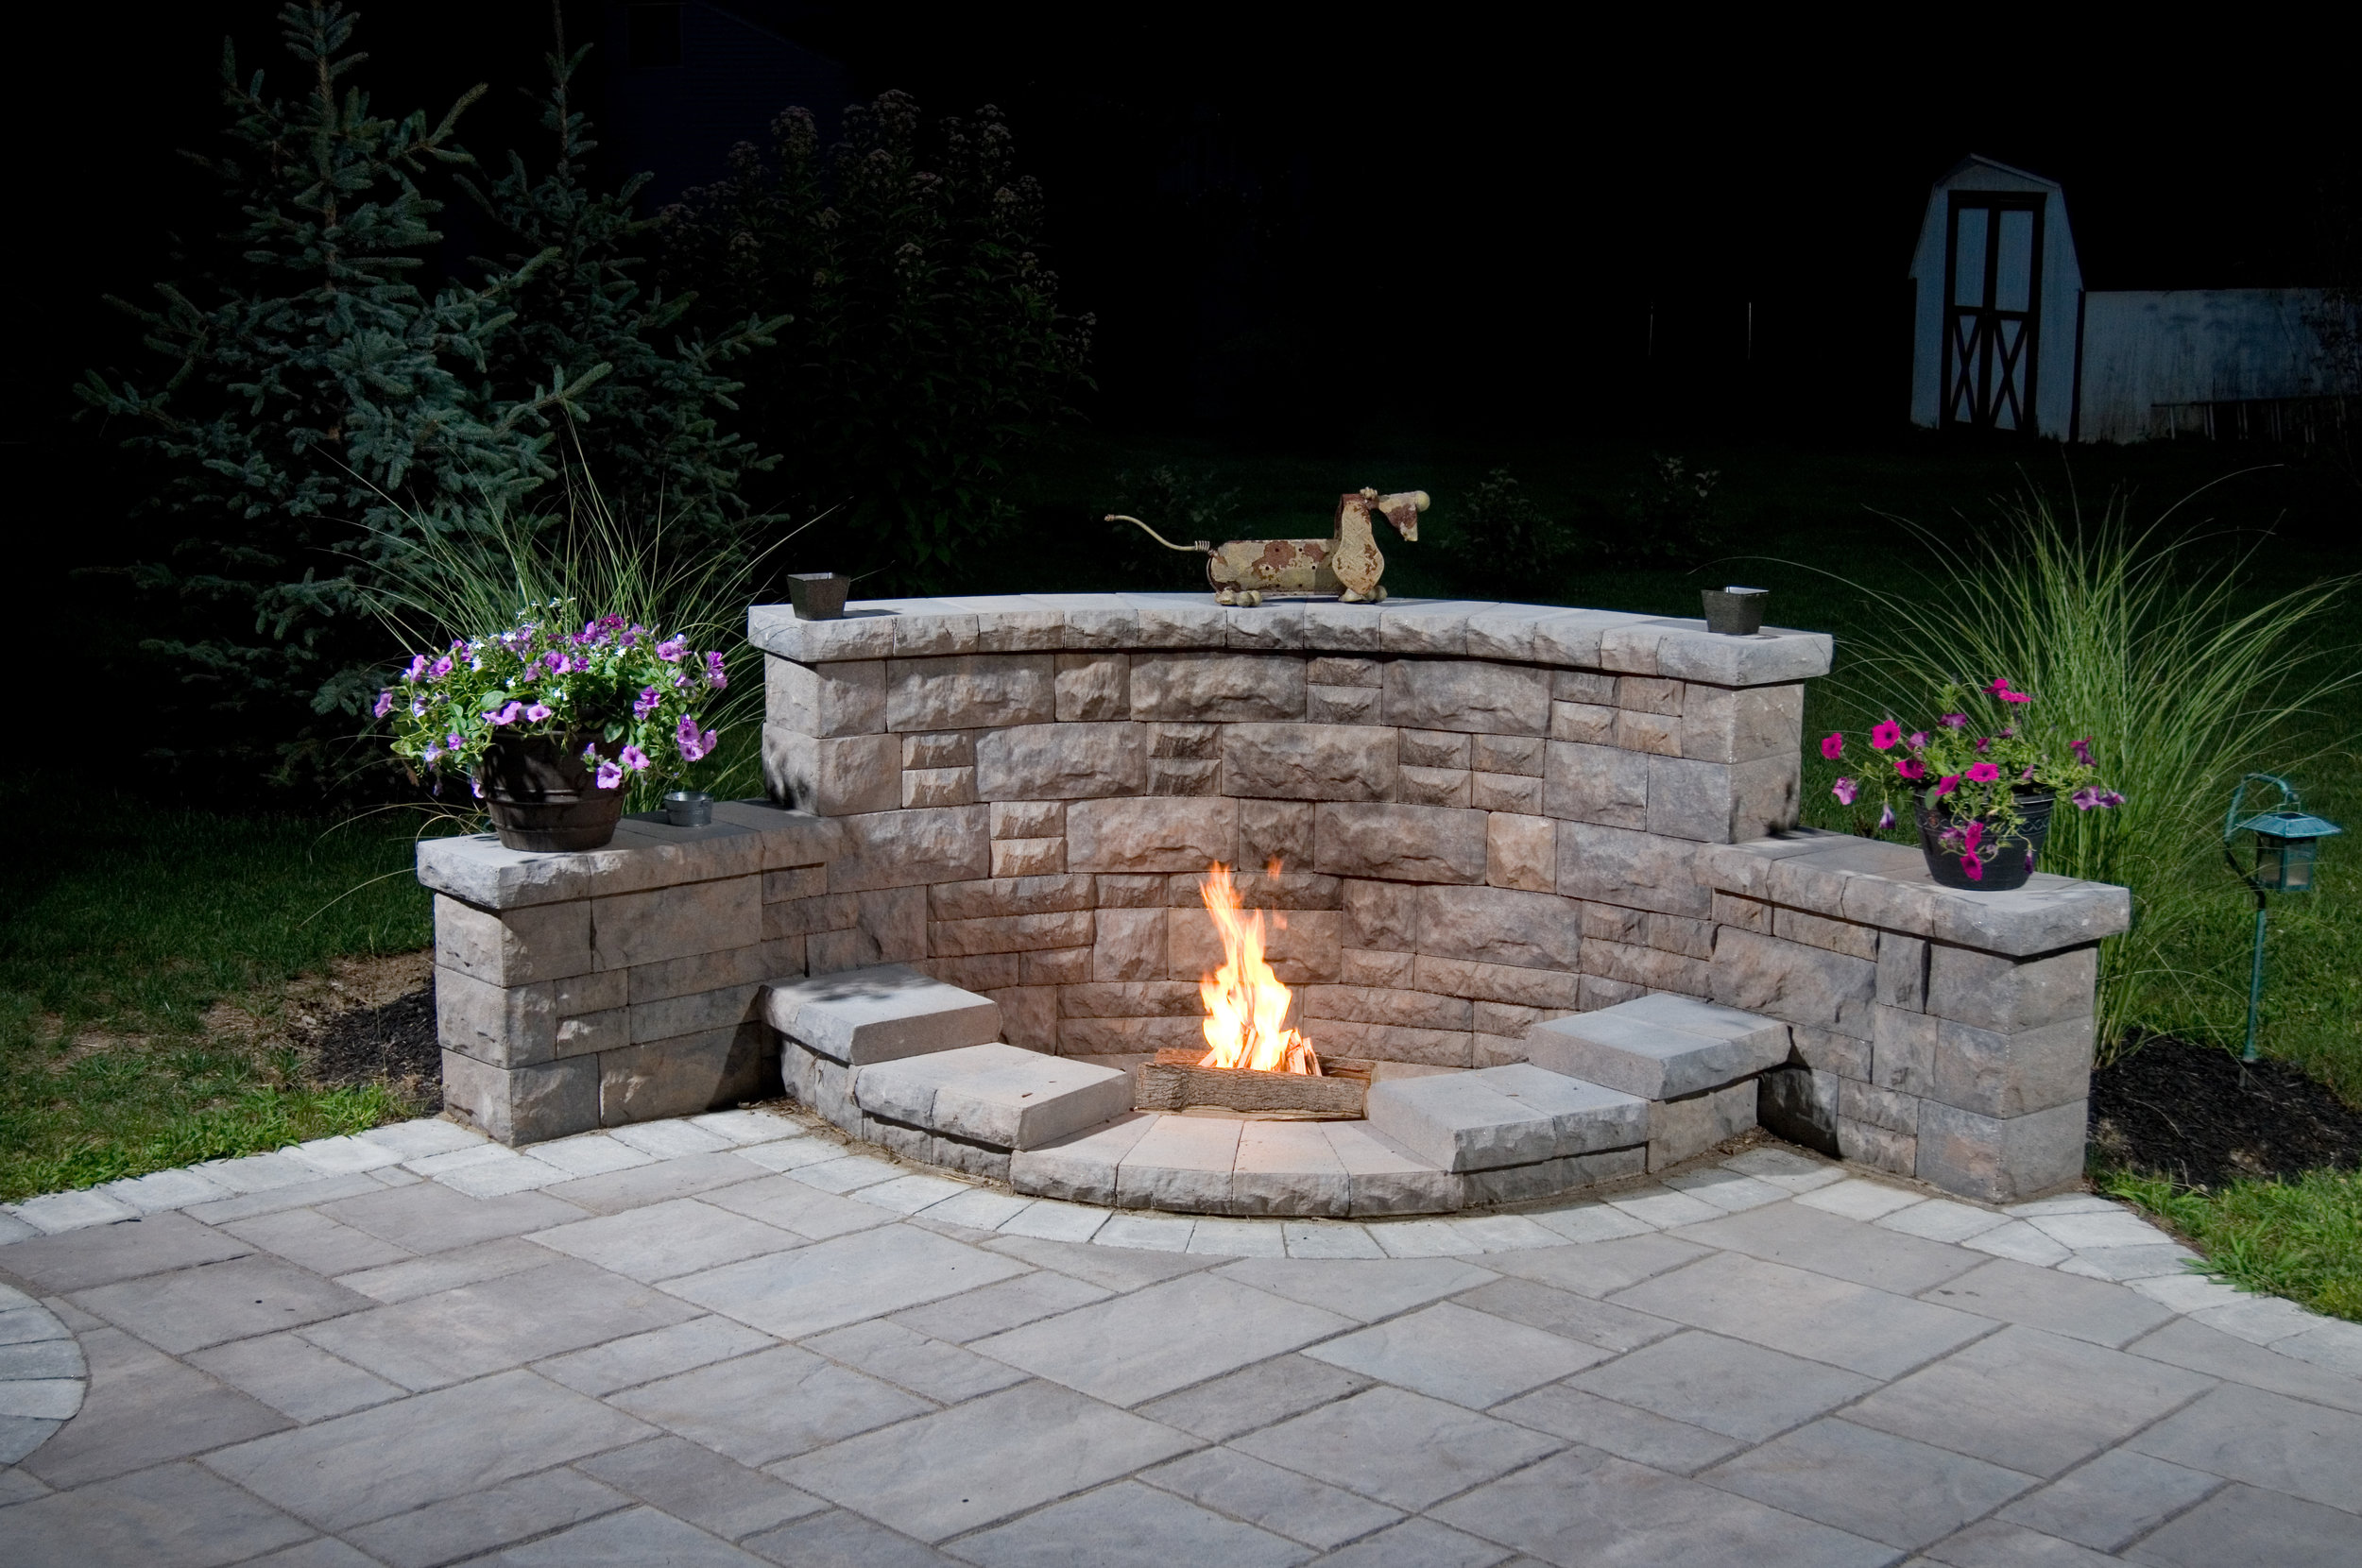 4 Beautiful Outdoor Fireplace And Fire, Outdoor Landscape Fireplace